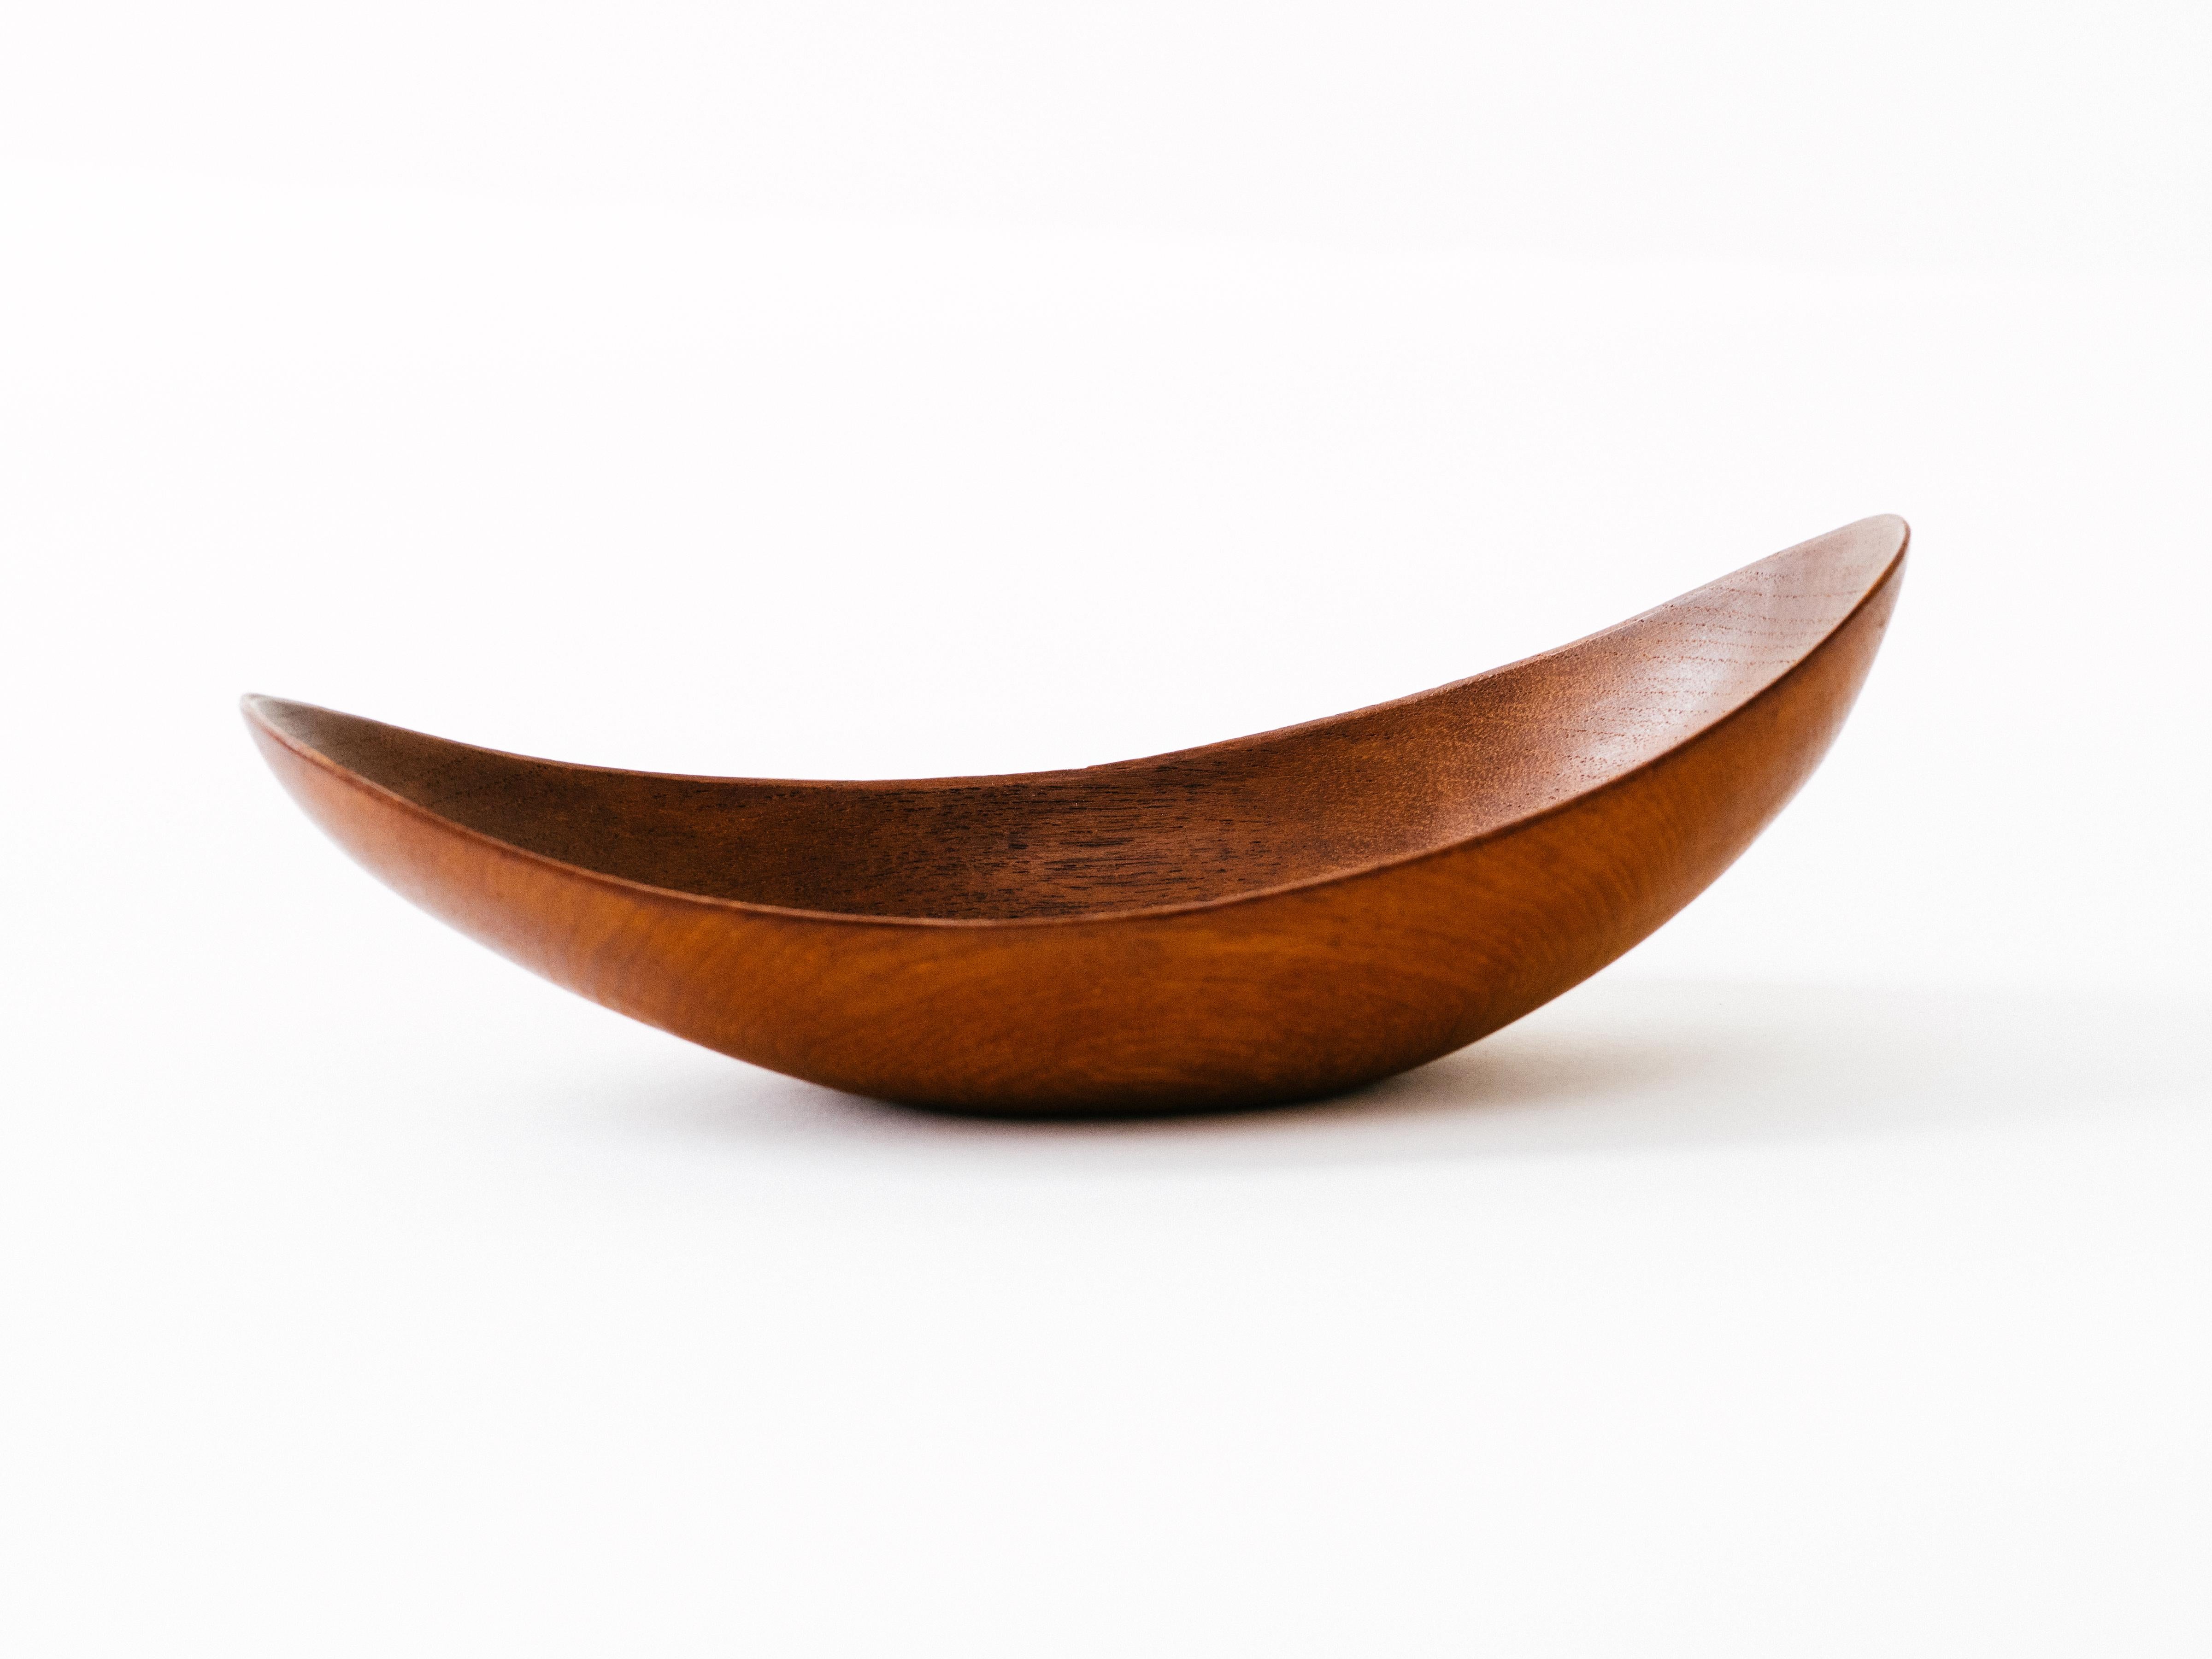 A delicate, petite bowl in teak with asymmetrically upswept ends, hand-carved by Stig Sandkvist. Signed with artist's initials to underside.